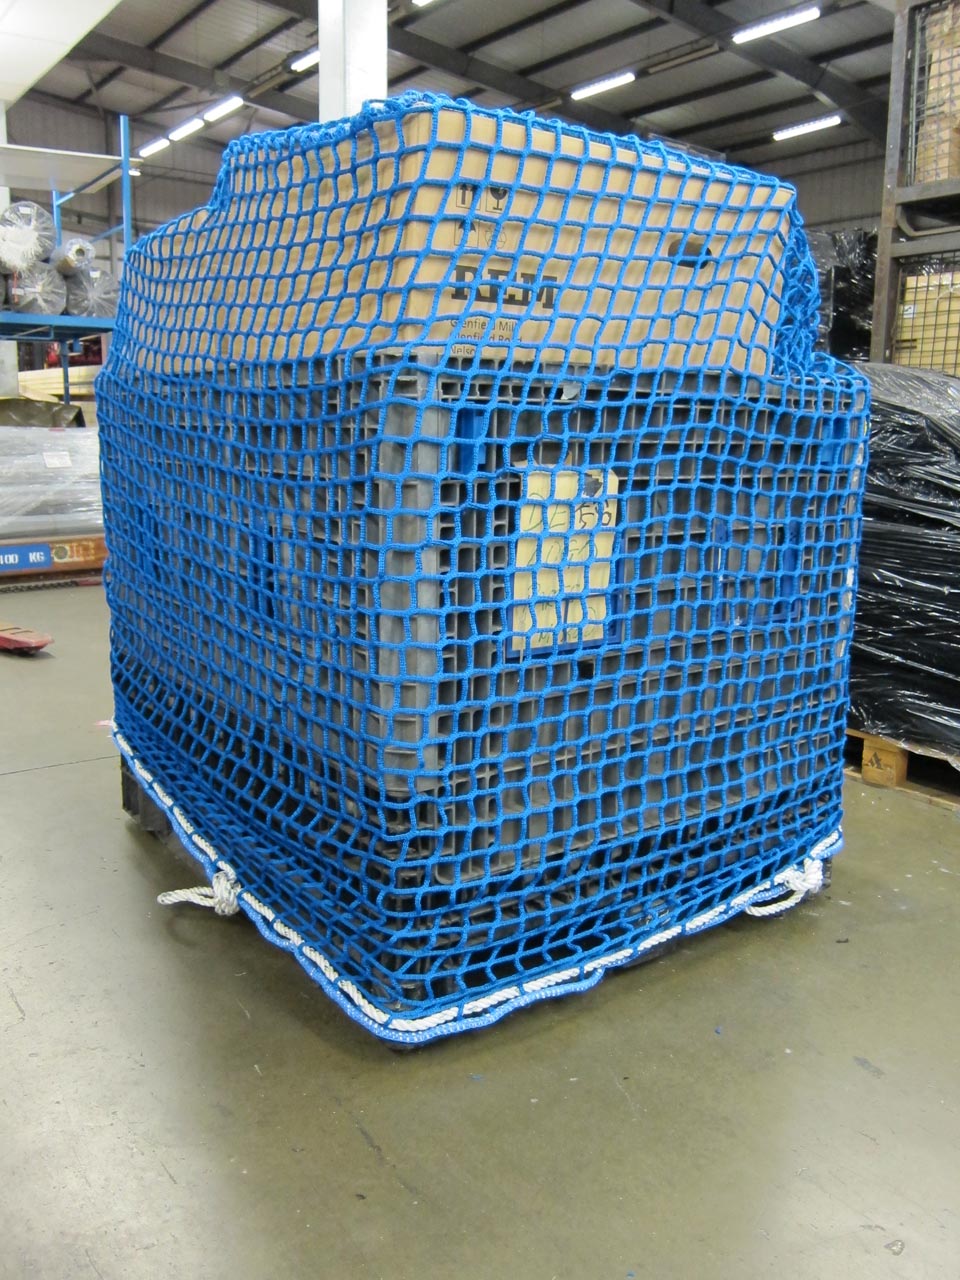 Large blue pallet cover net with border rope